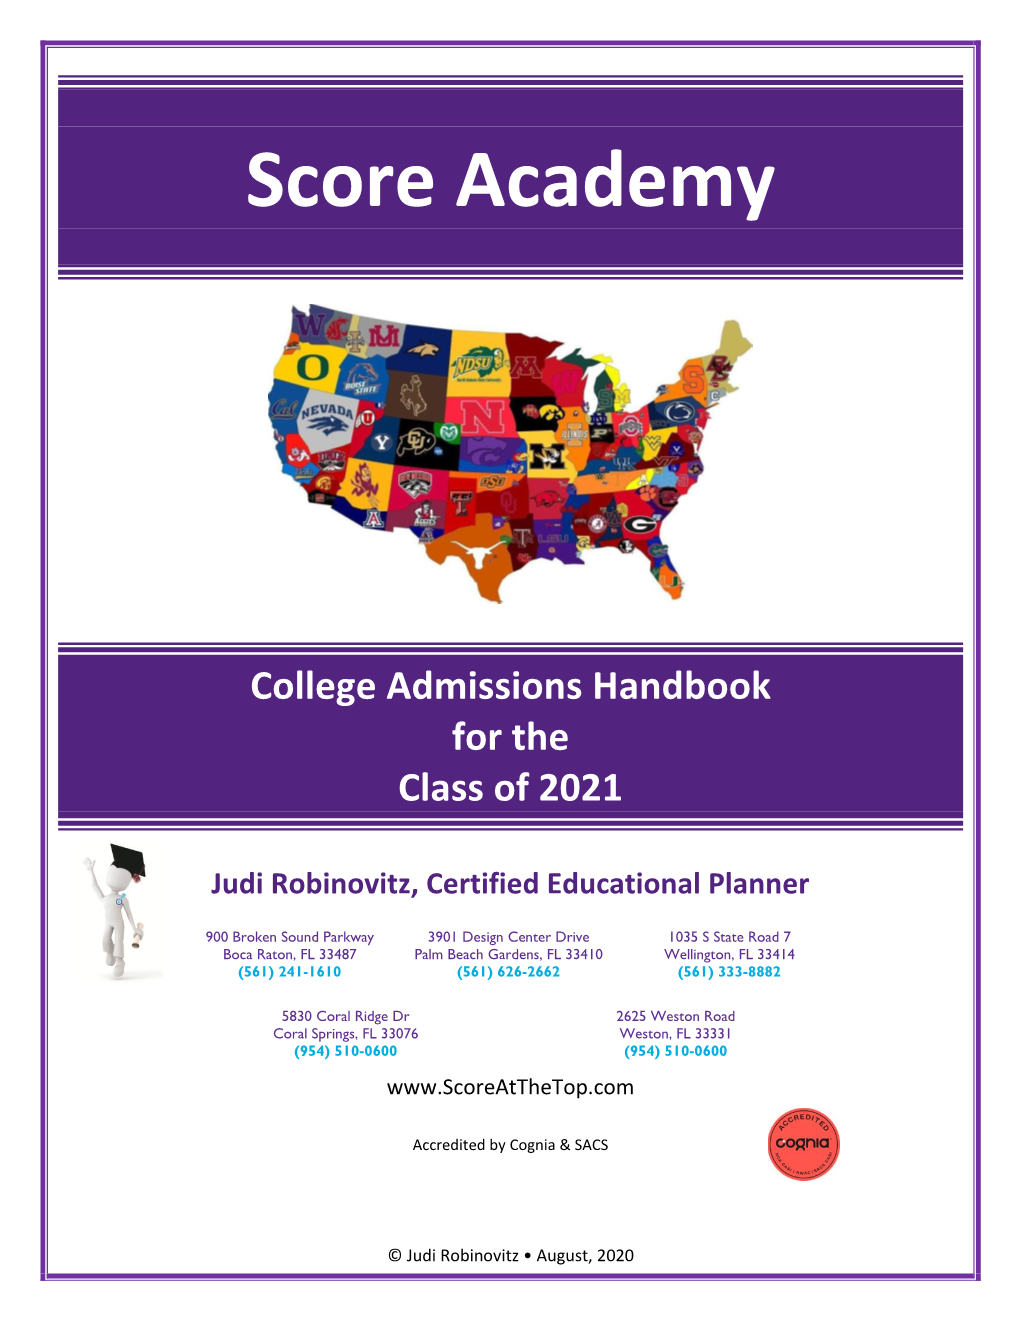 College Admissions Handbook for the Class of 2021